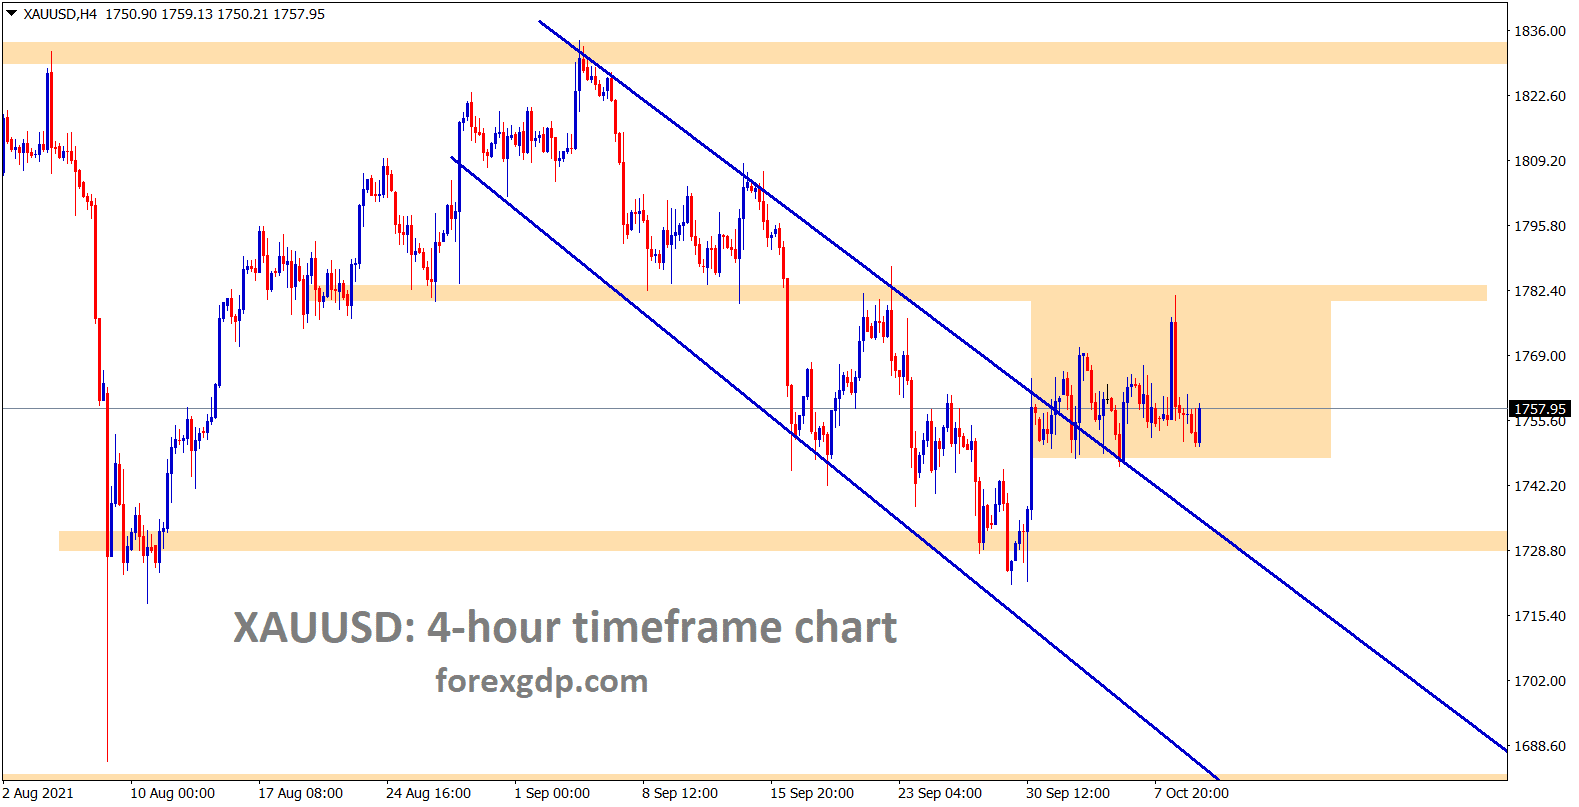 Gold is consolidating between the support and resistance area after breaking the descending channel